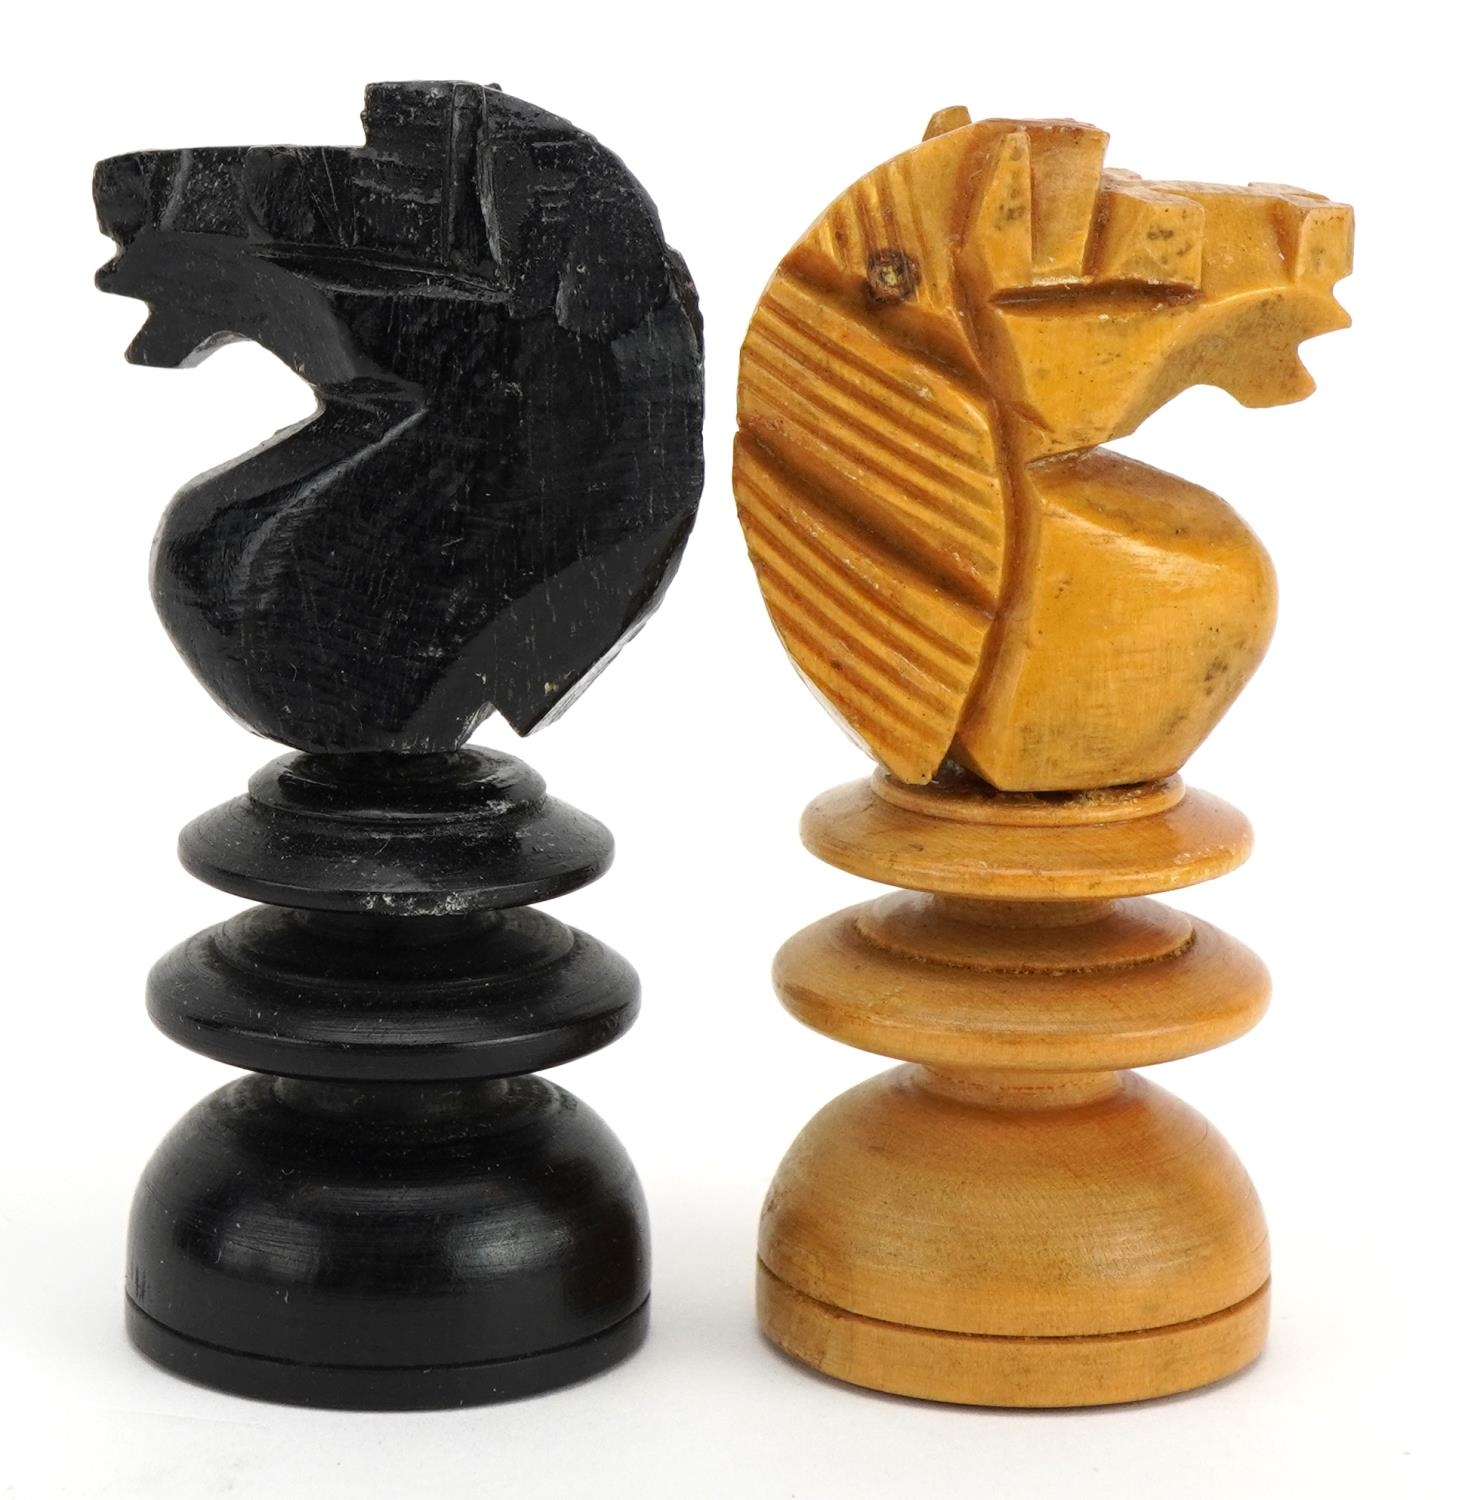 Boxwood and ebony Chessmen pattern chess set, the largest pieces each 9cm high - Image 5 of 6